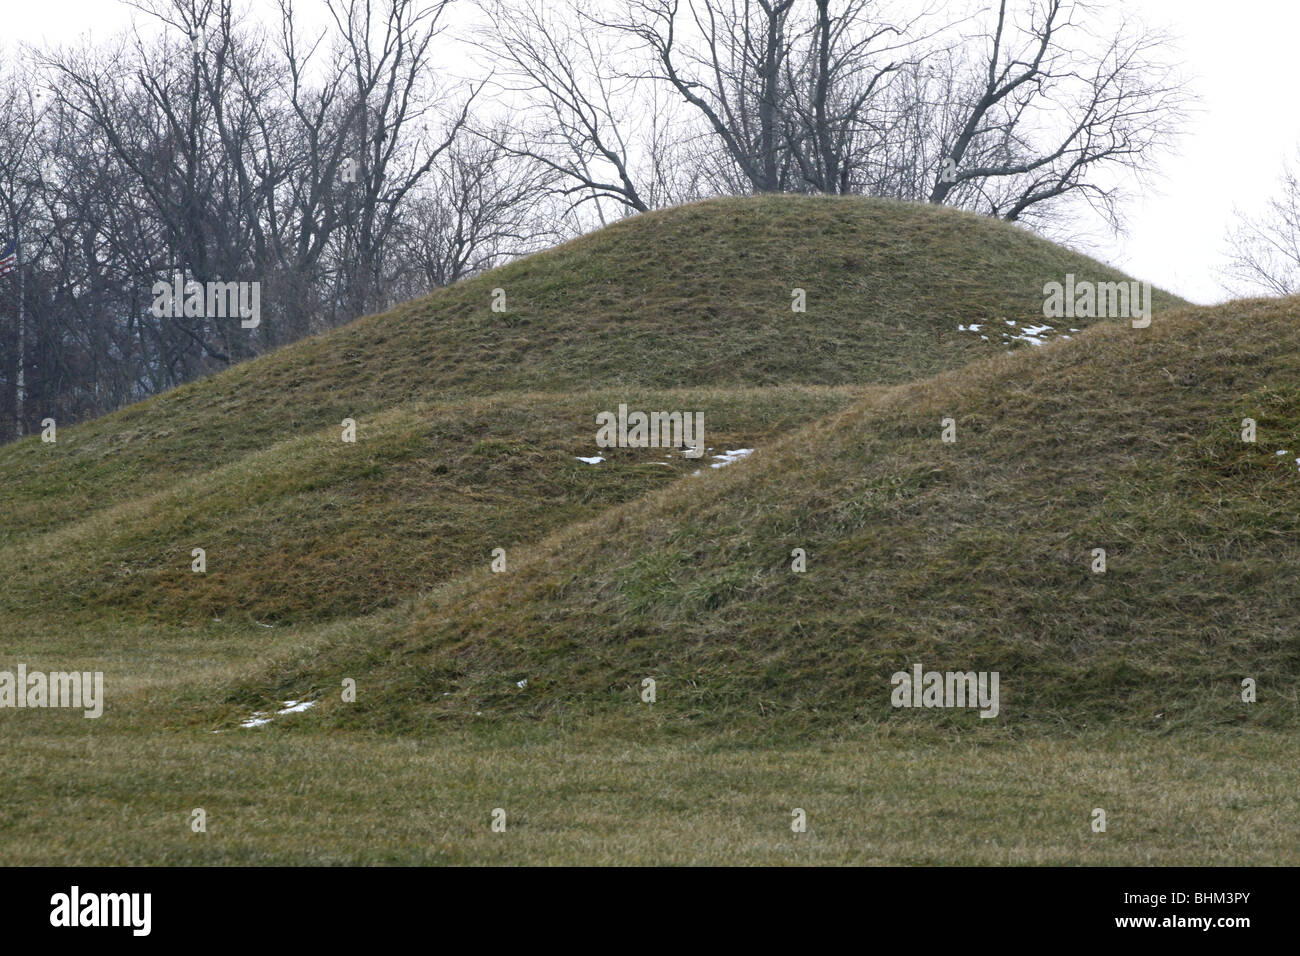 Hopewell Culture National Historical Park Indian mounds earthworks Chillicothe ohio Stock Photo